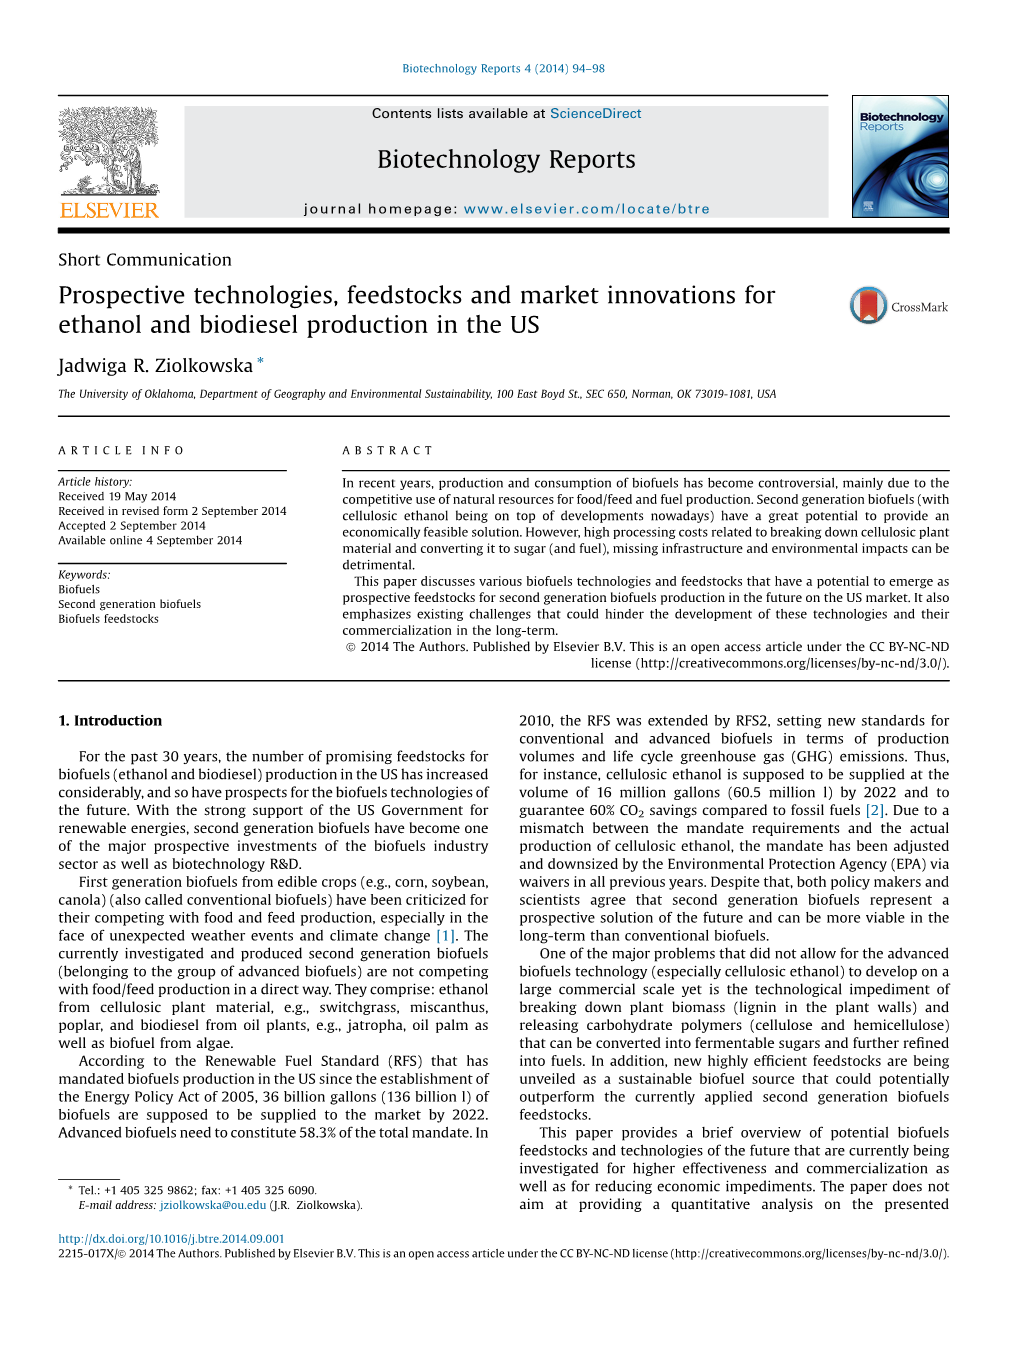 Prospective Technologies, Feedstocks and Market Innovations for Ethanol and Biodiesel Production in the US